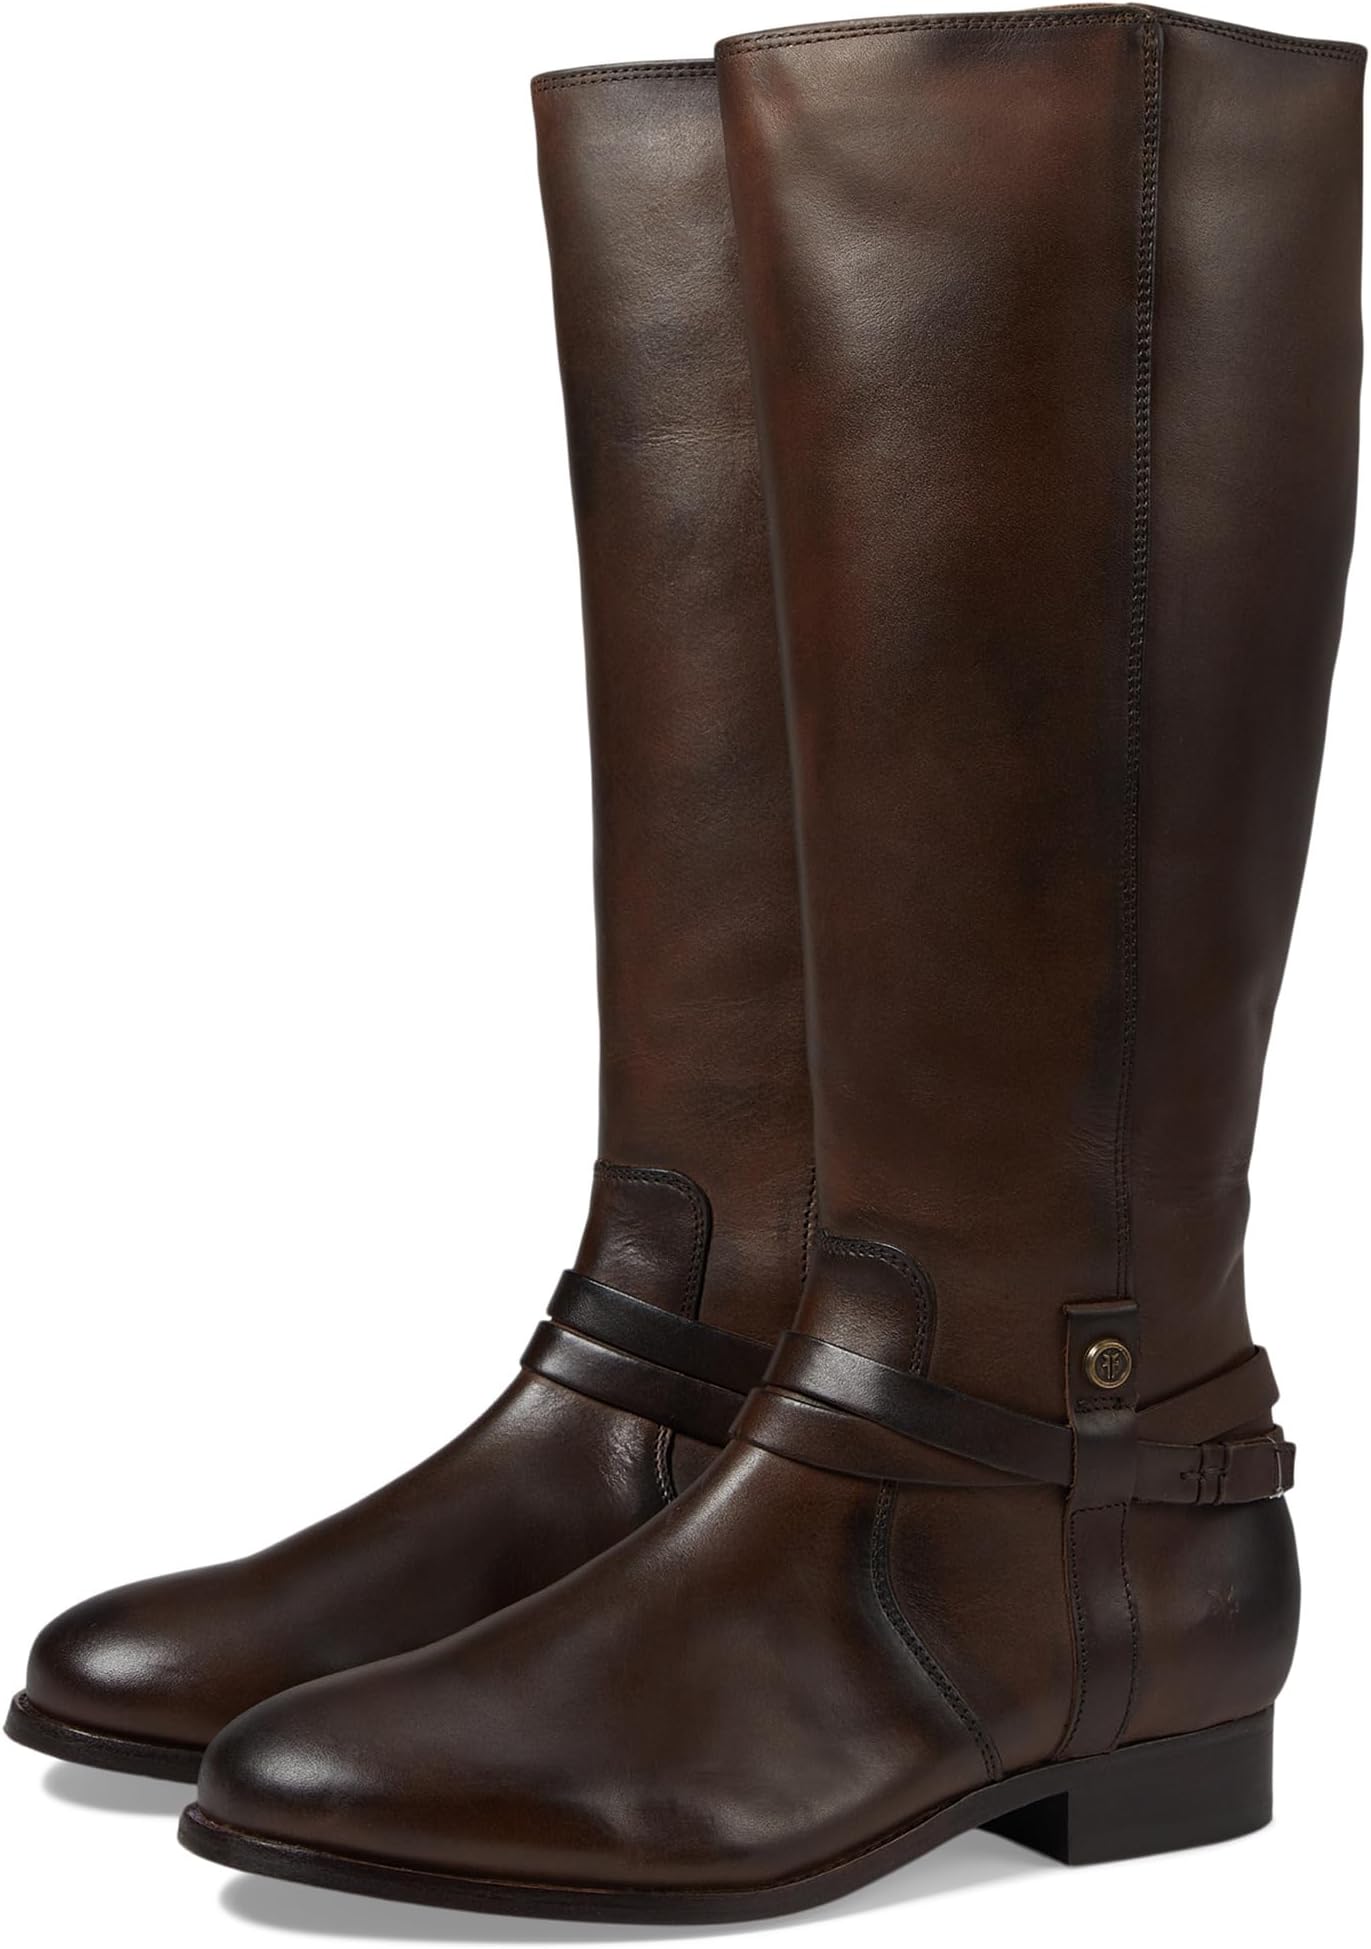 Сапоги Melissa Belted Tall Frye, цвет Chocolate сапоги melissa belted tall frye цвет chocolate